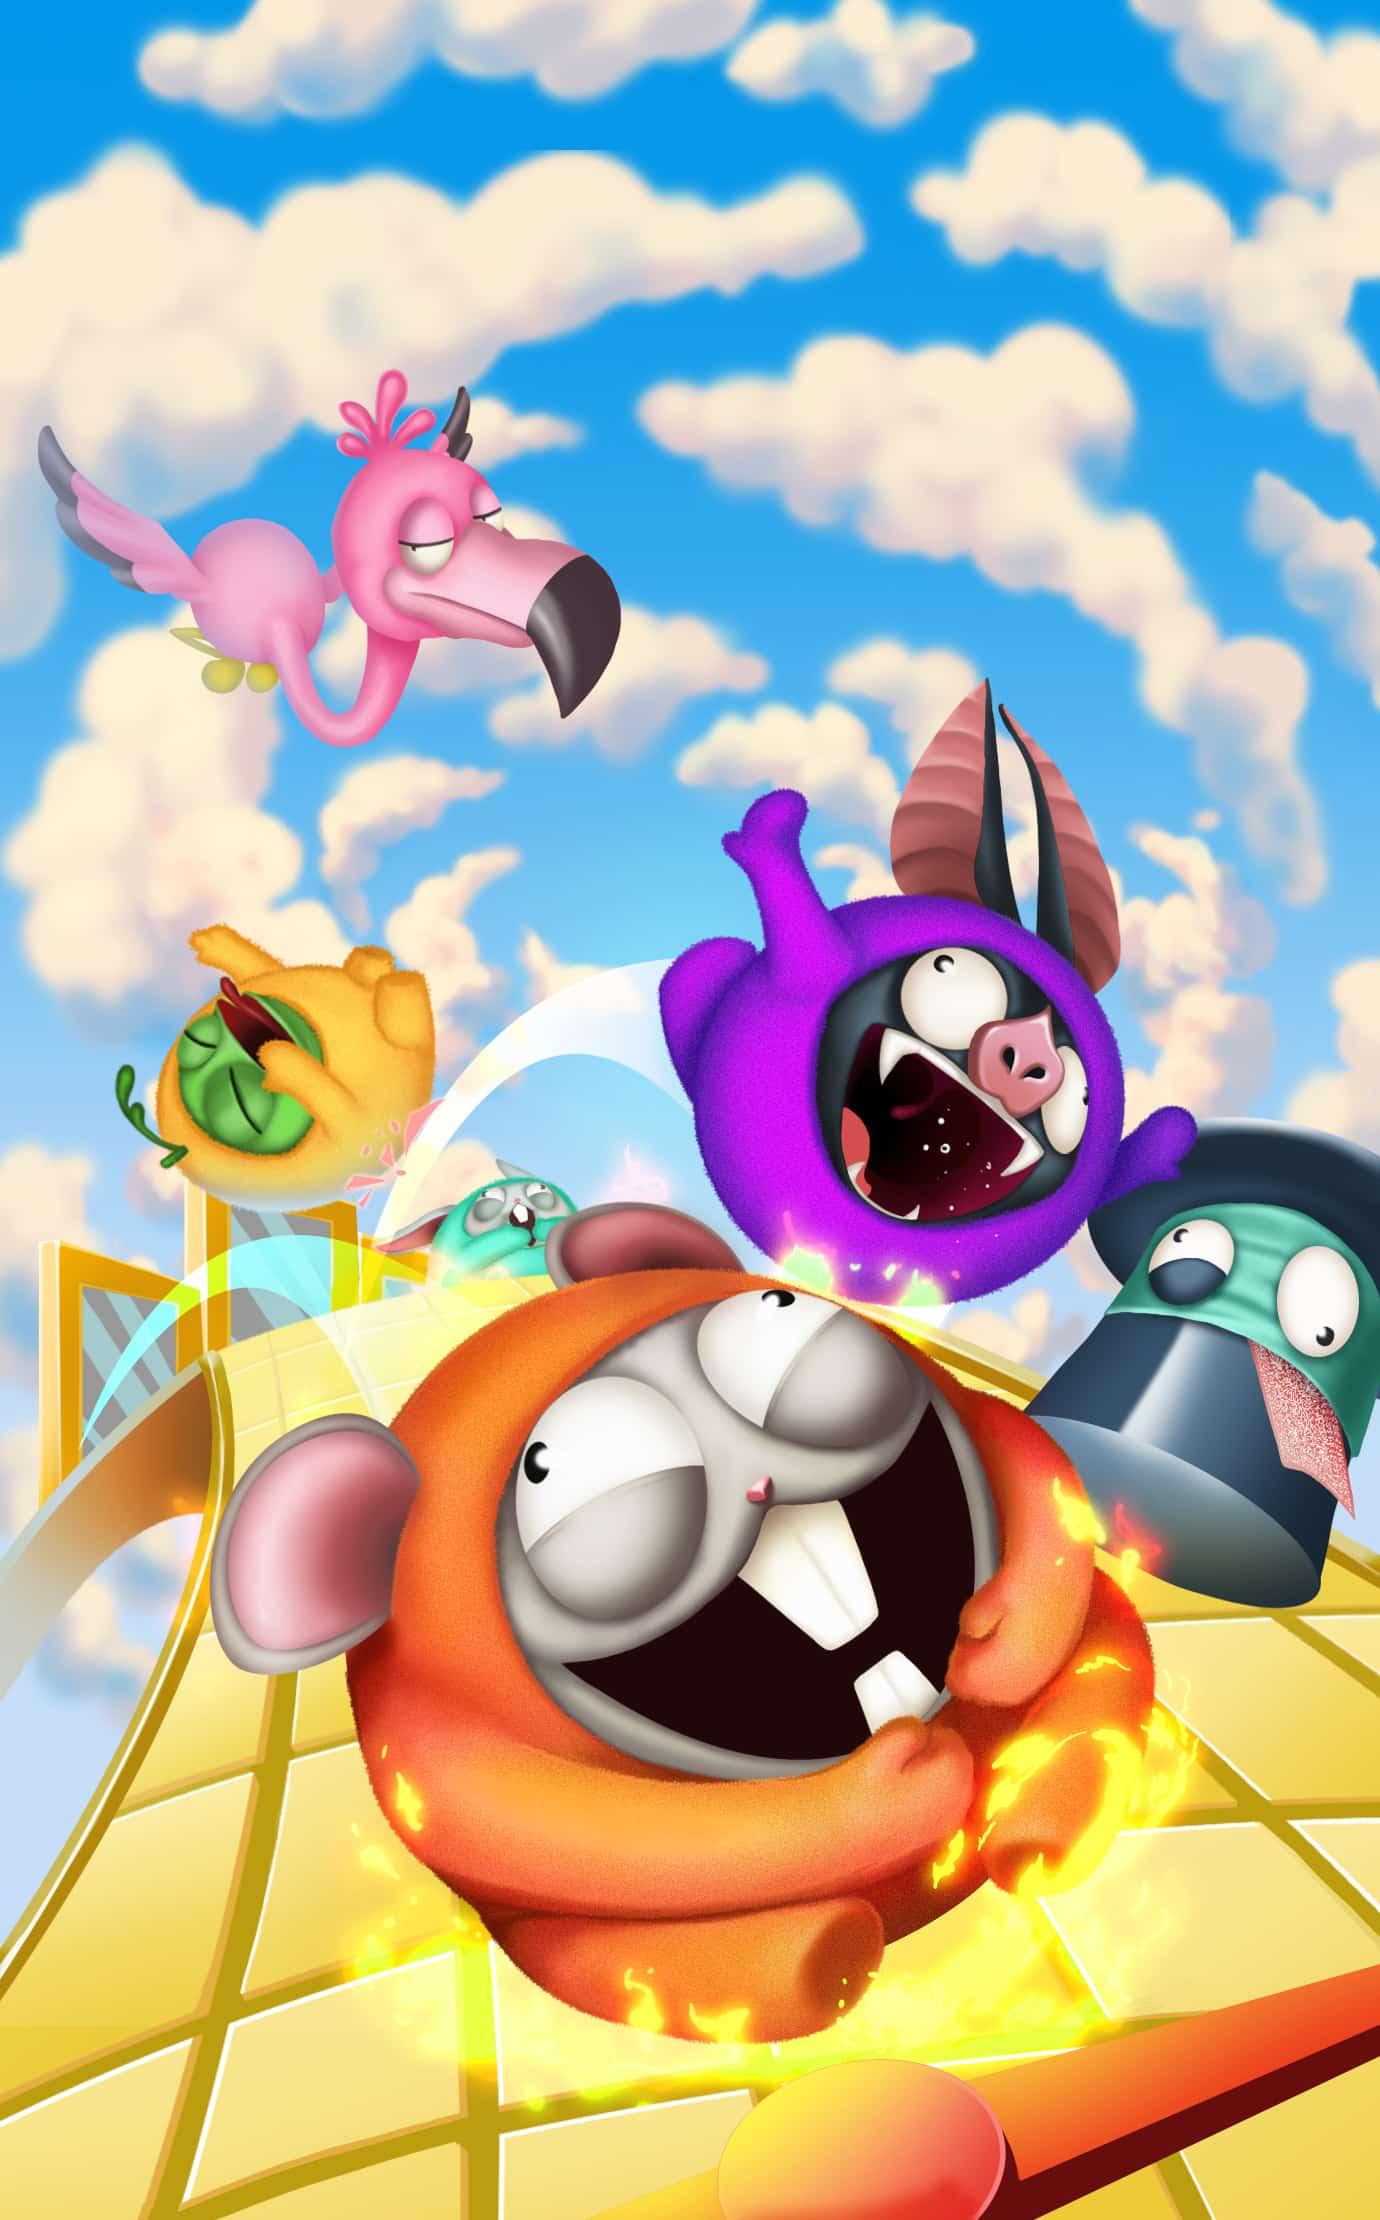 Ball Guys: Furry Road ist das ultimative mobile PVP-Multiplayer-Spiel